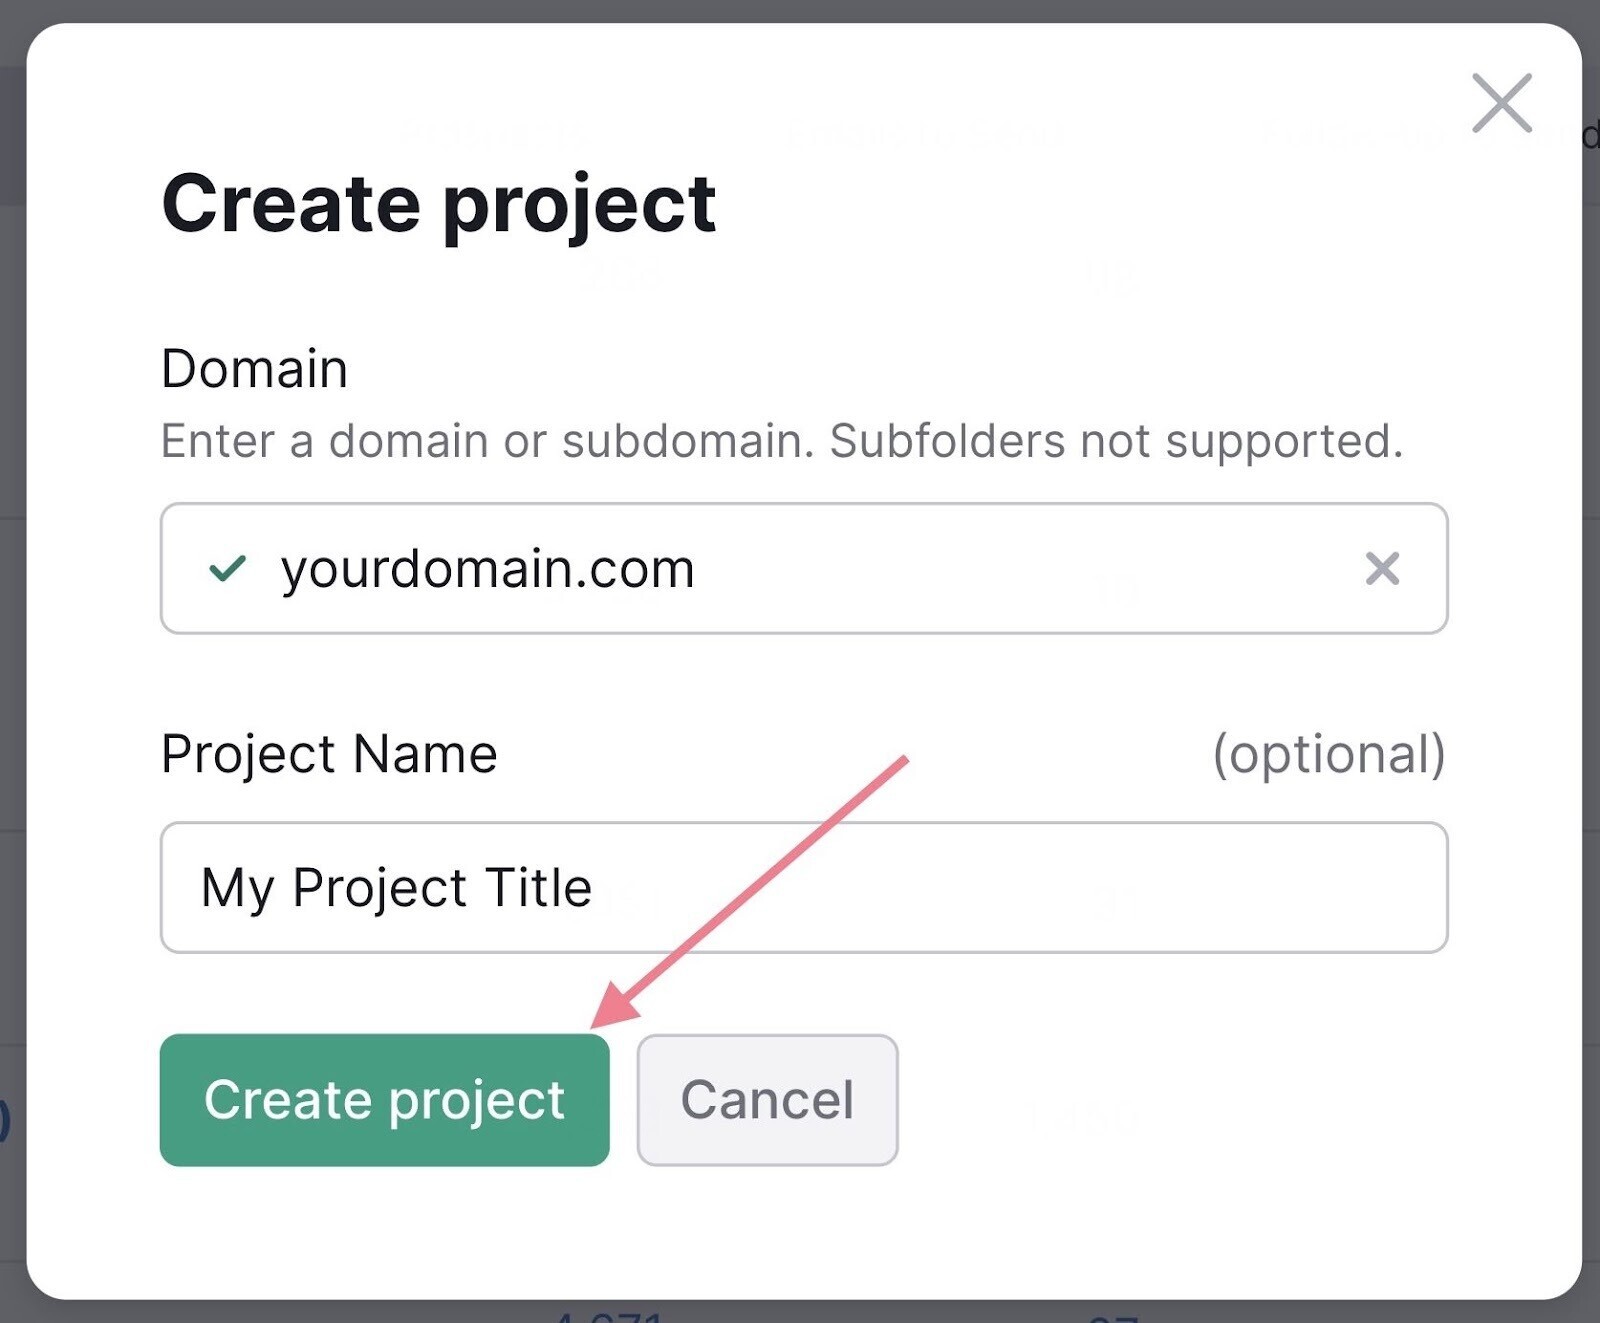 Enter domain and name project